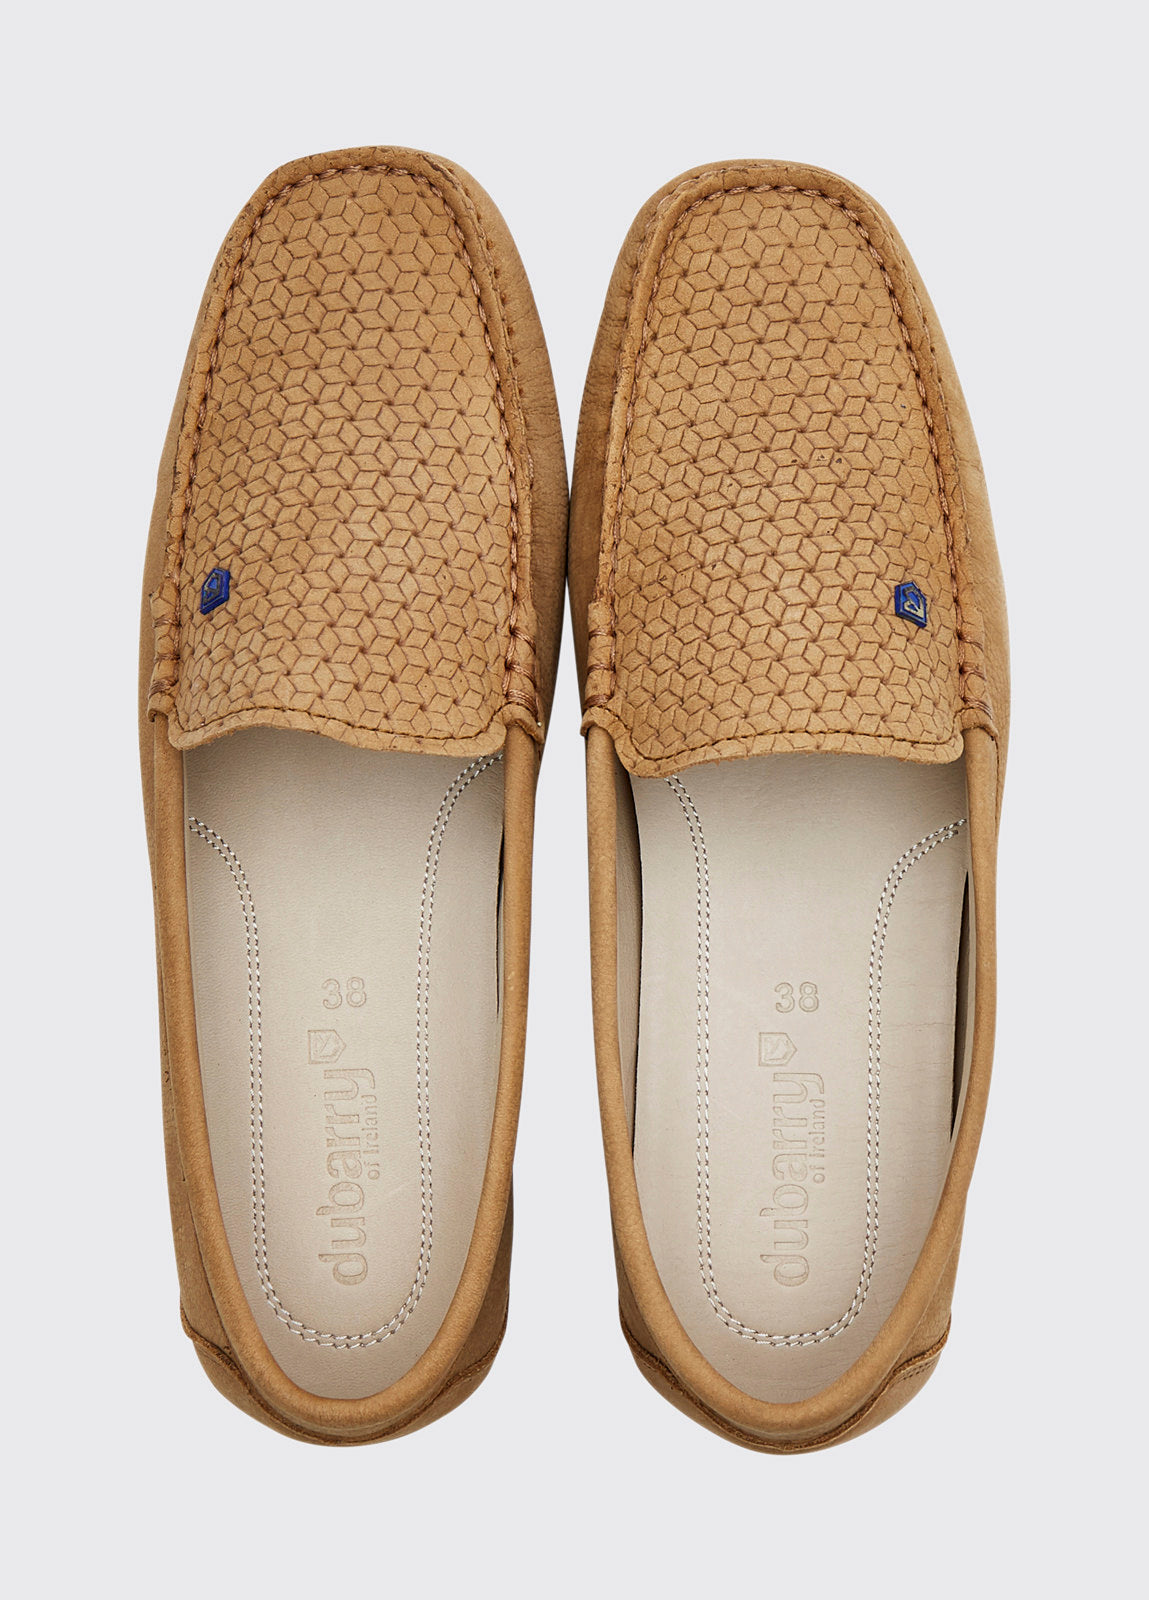 Cannes Loafer - Tan